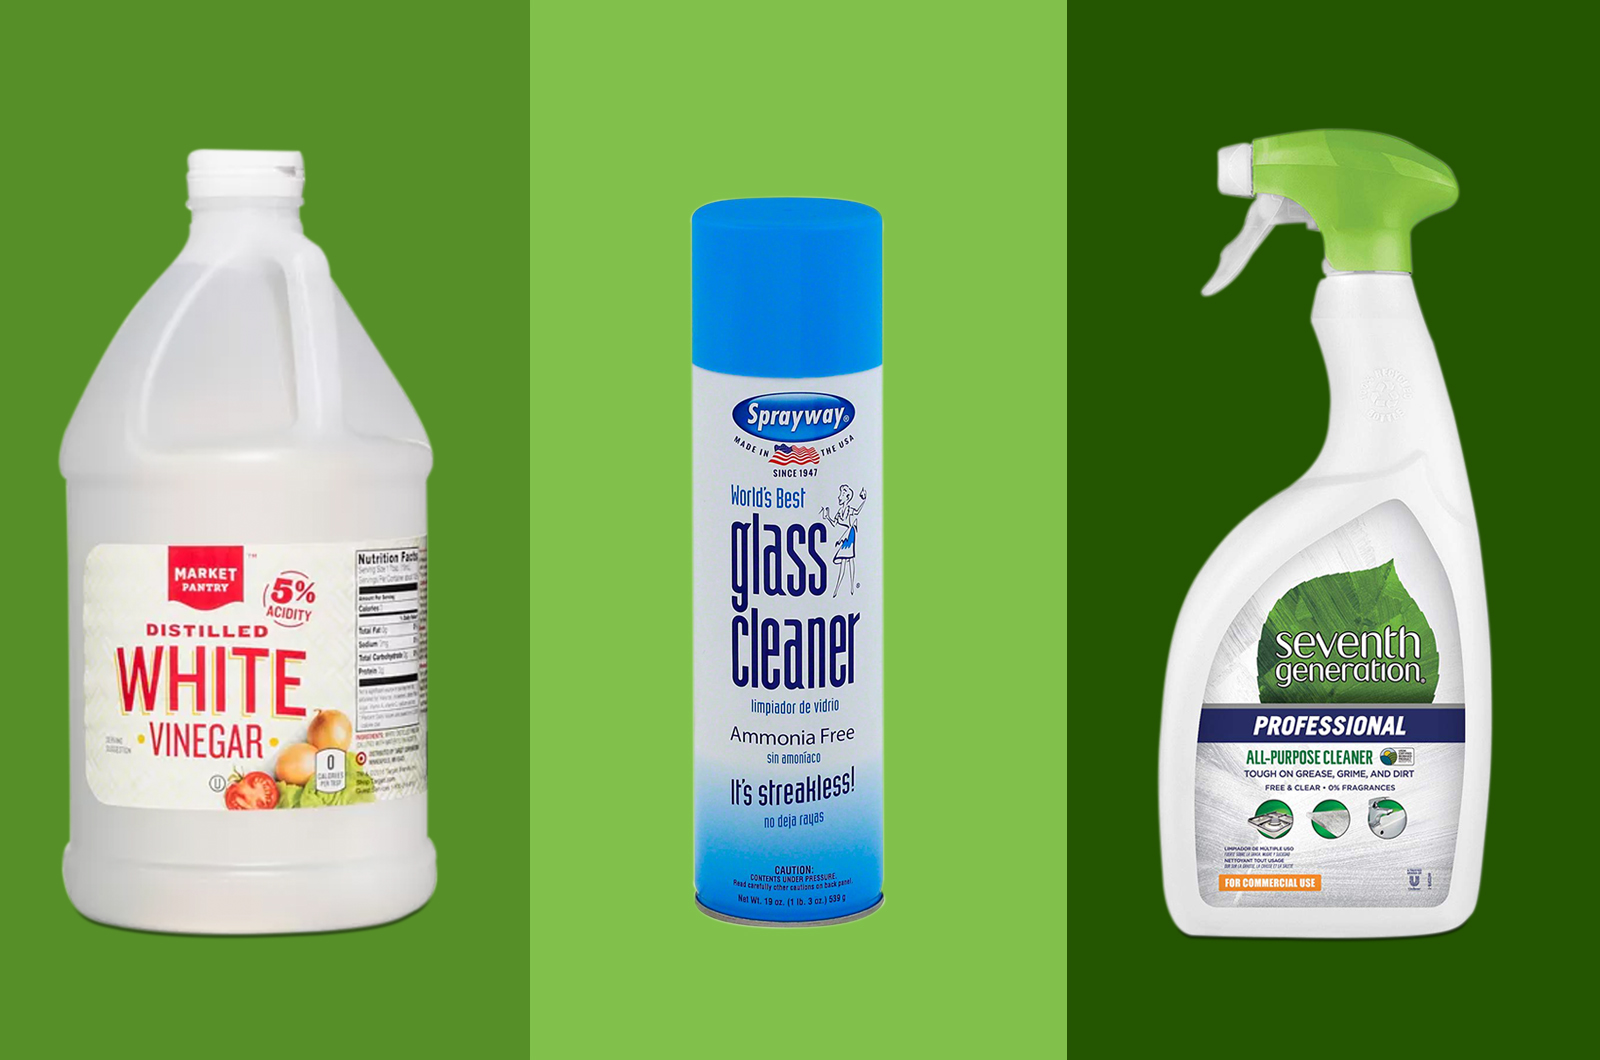 cleaning products for house cleaning